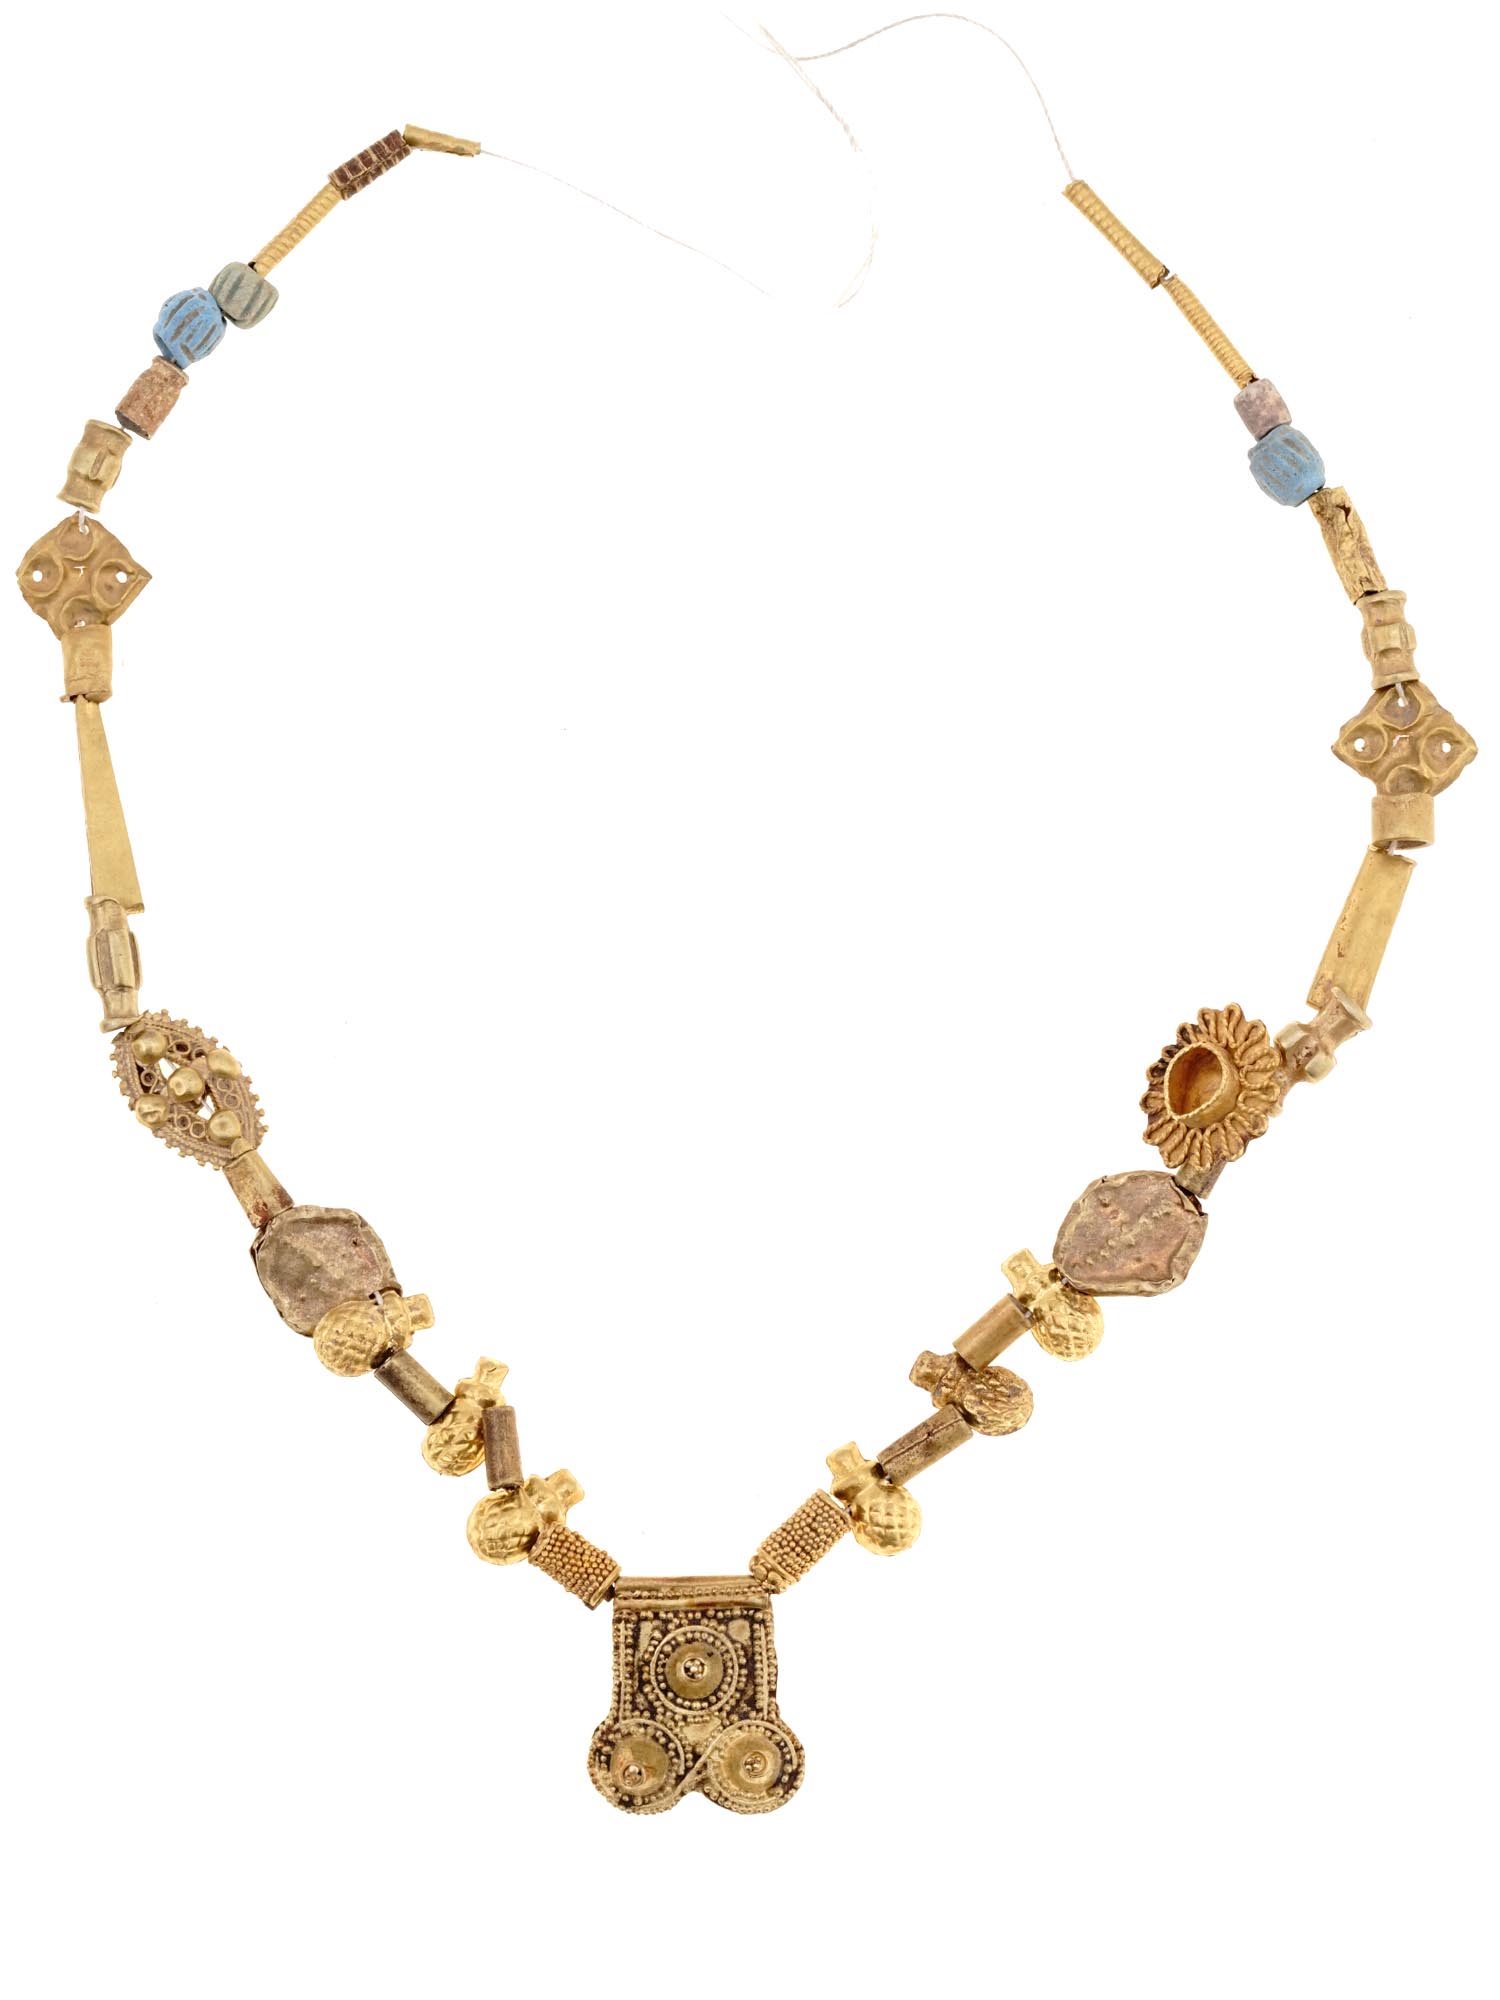 ANCIENT IMPERIAL ROMAN 22K GOLD BEADED NECKLACE PIC-1